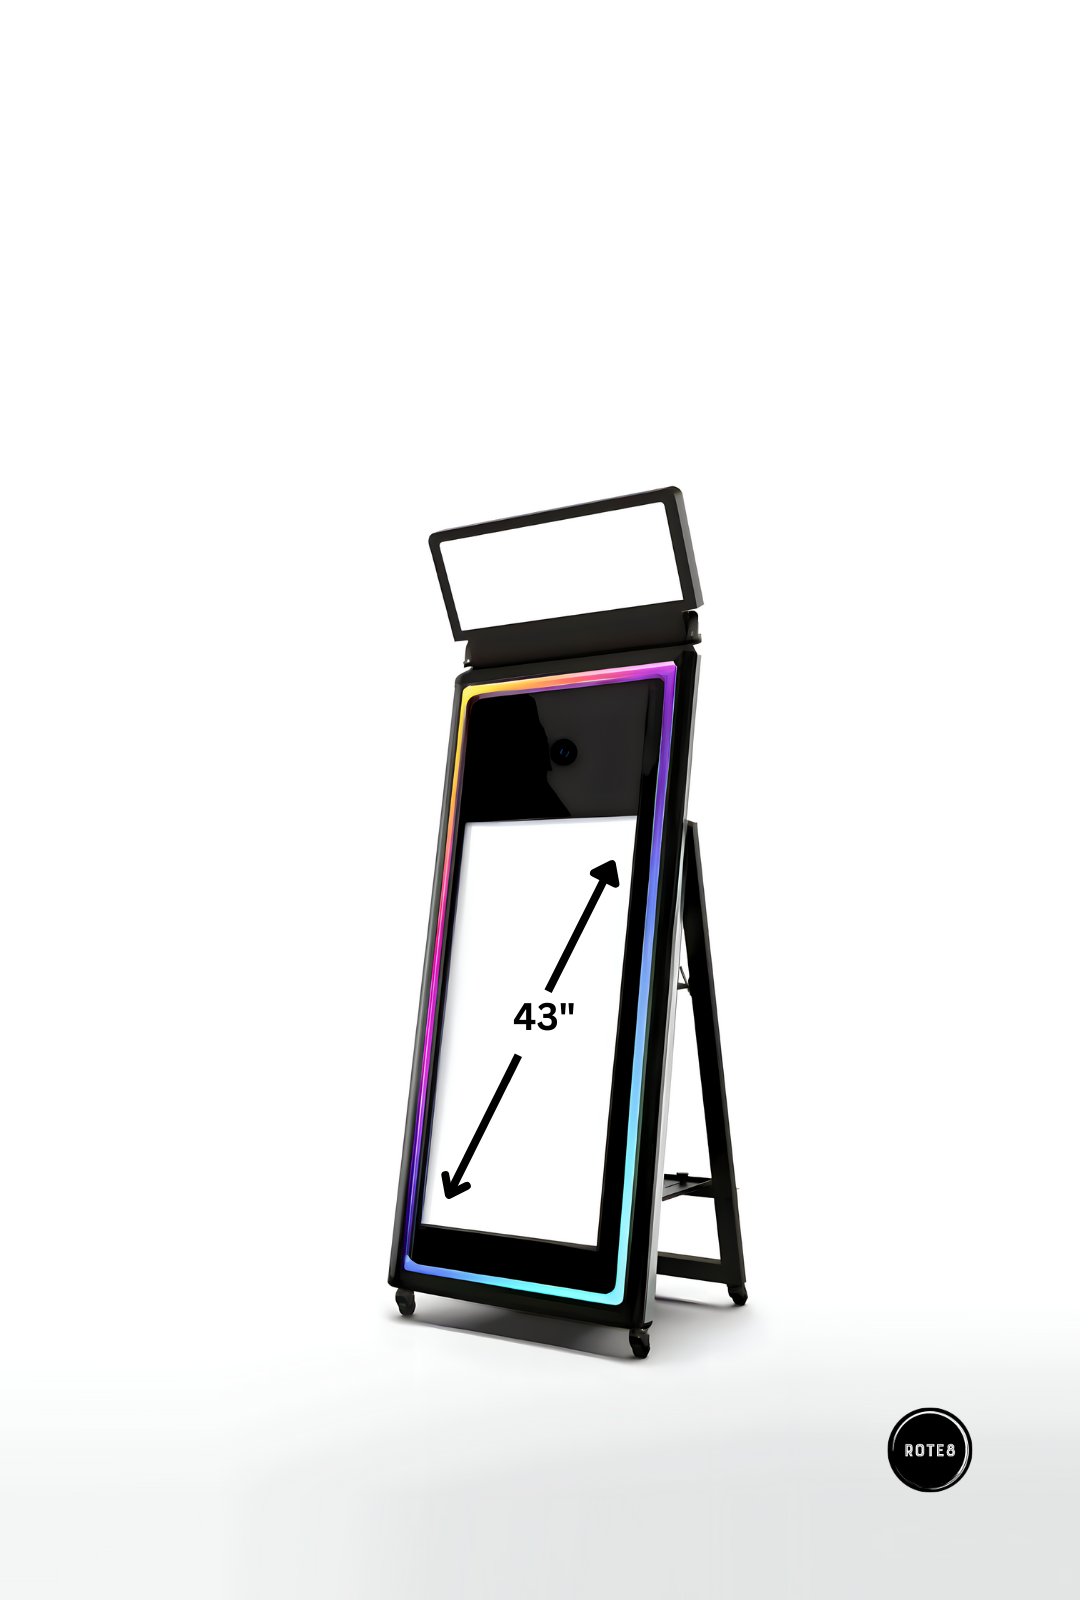 Mirror Photo Booth For Sale Cheap Price